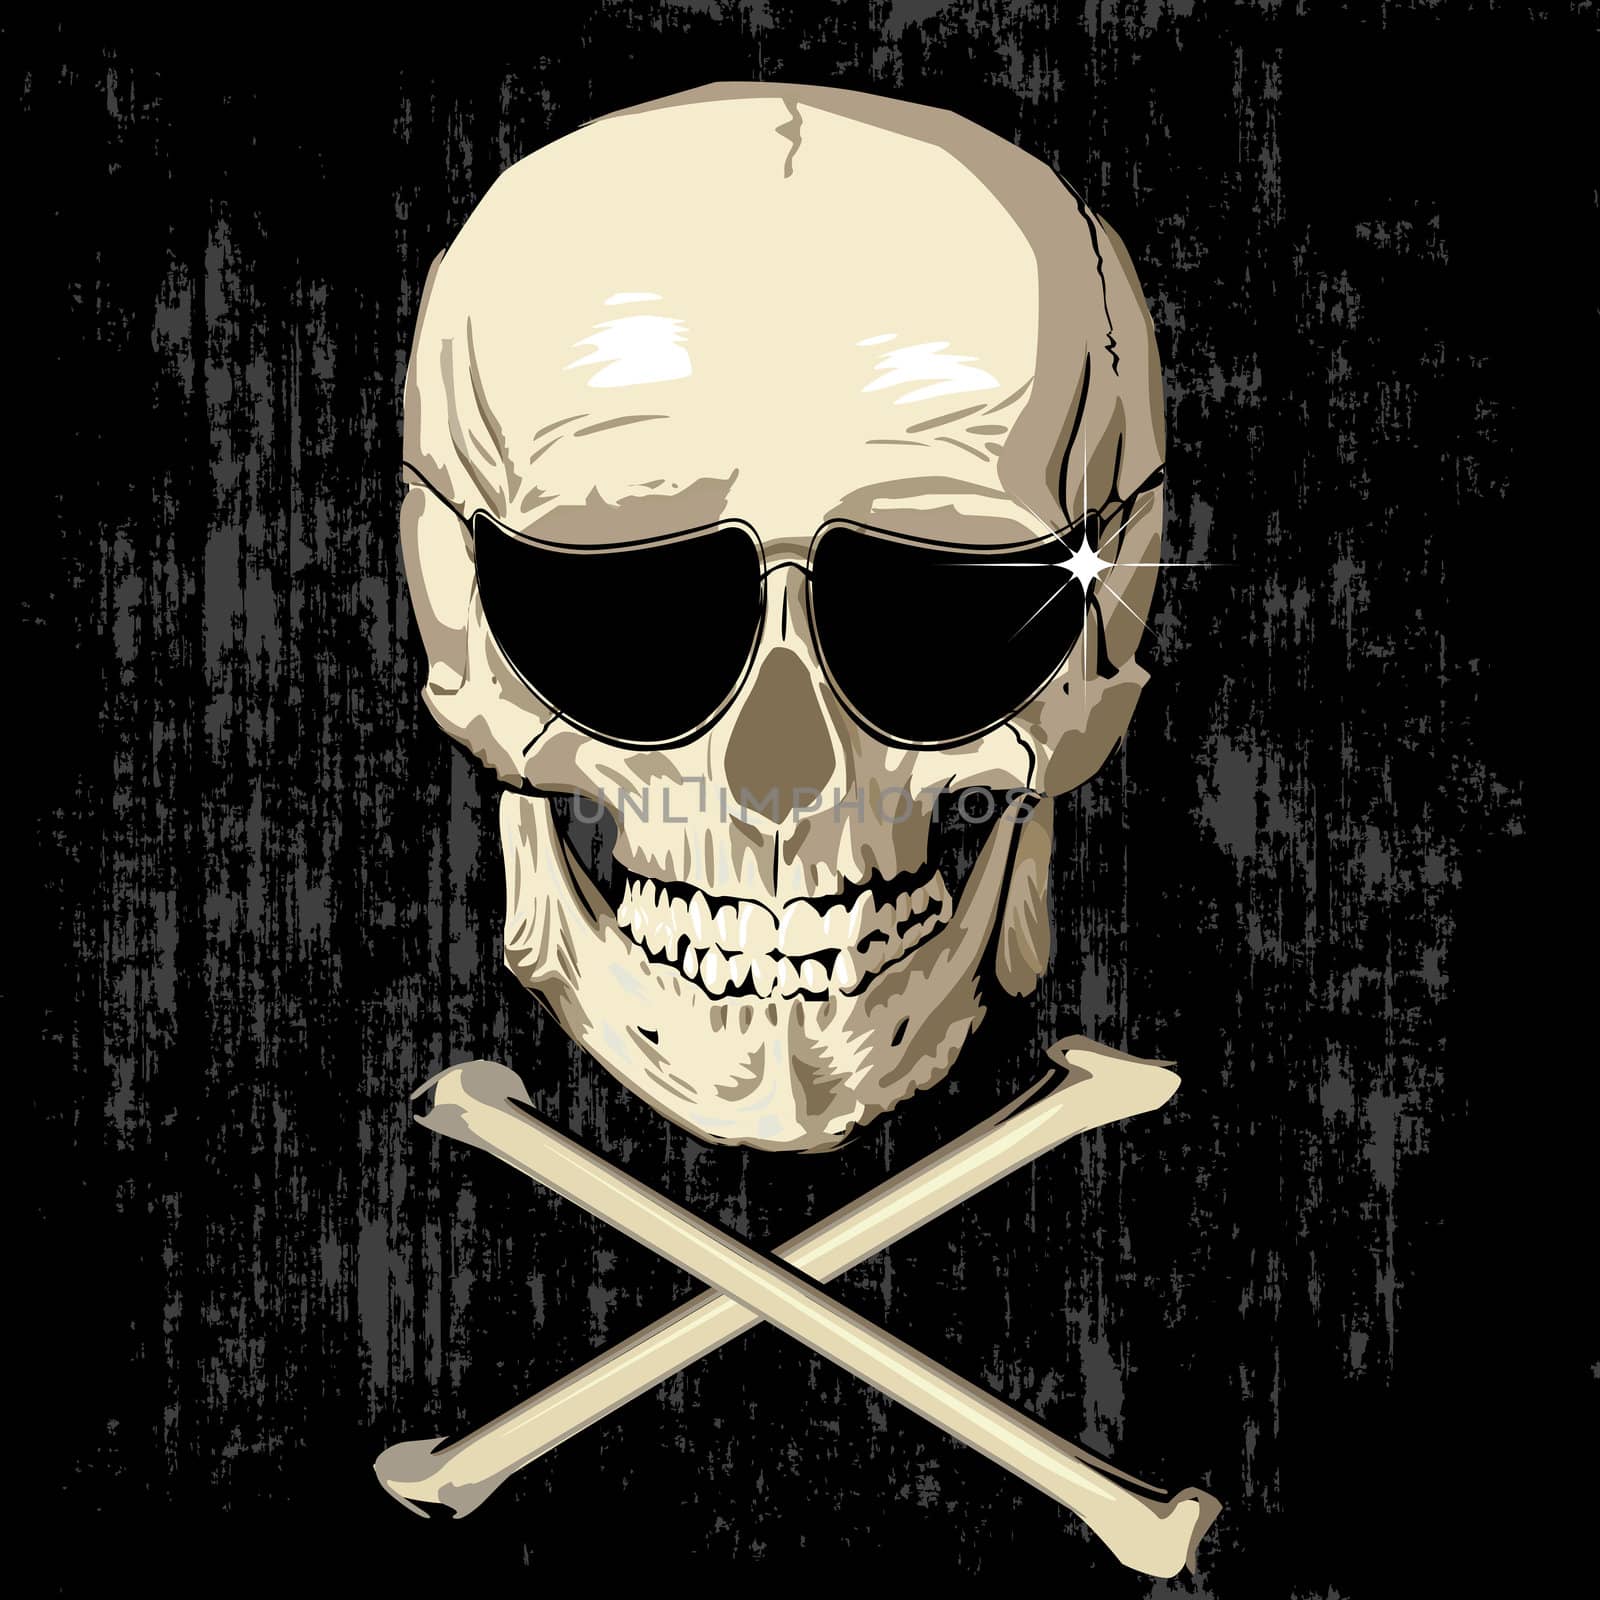 Grunge background with human skull wearing sunglasses and bones